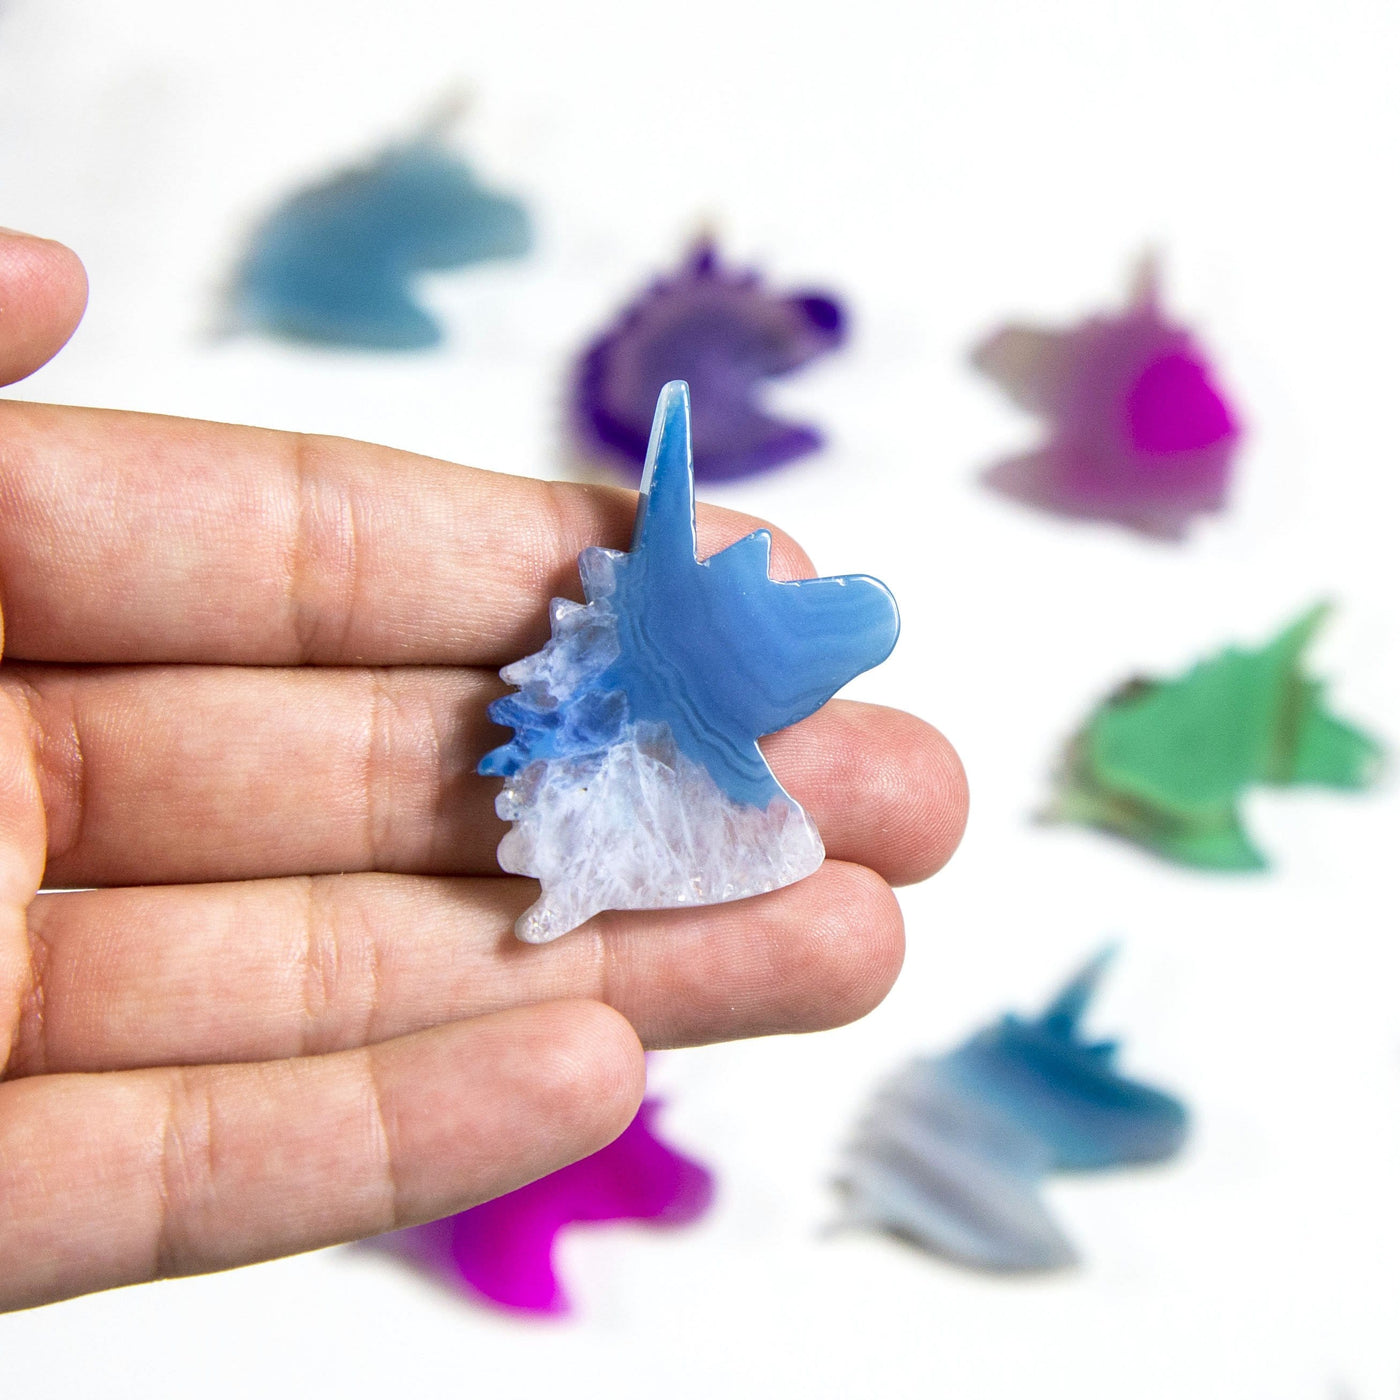 Picture of blue unicorn being held, for size reference.